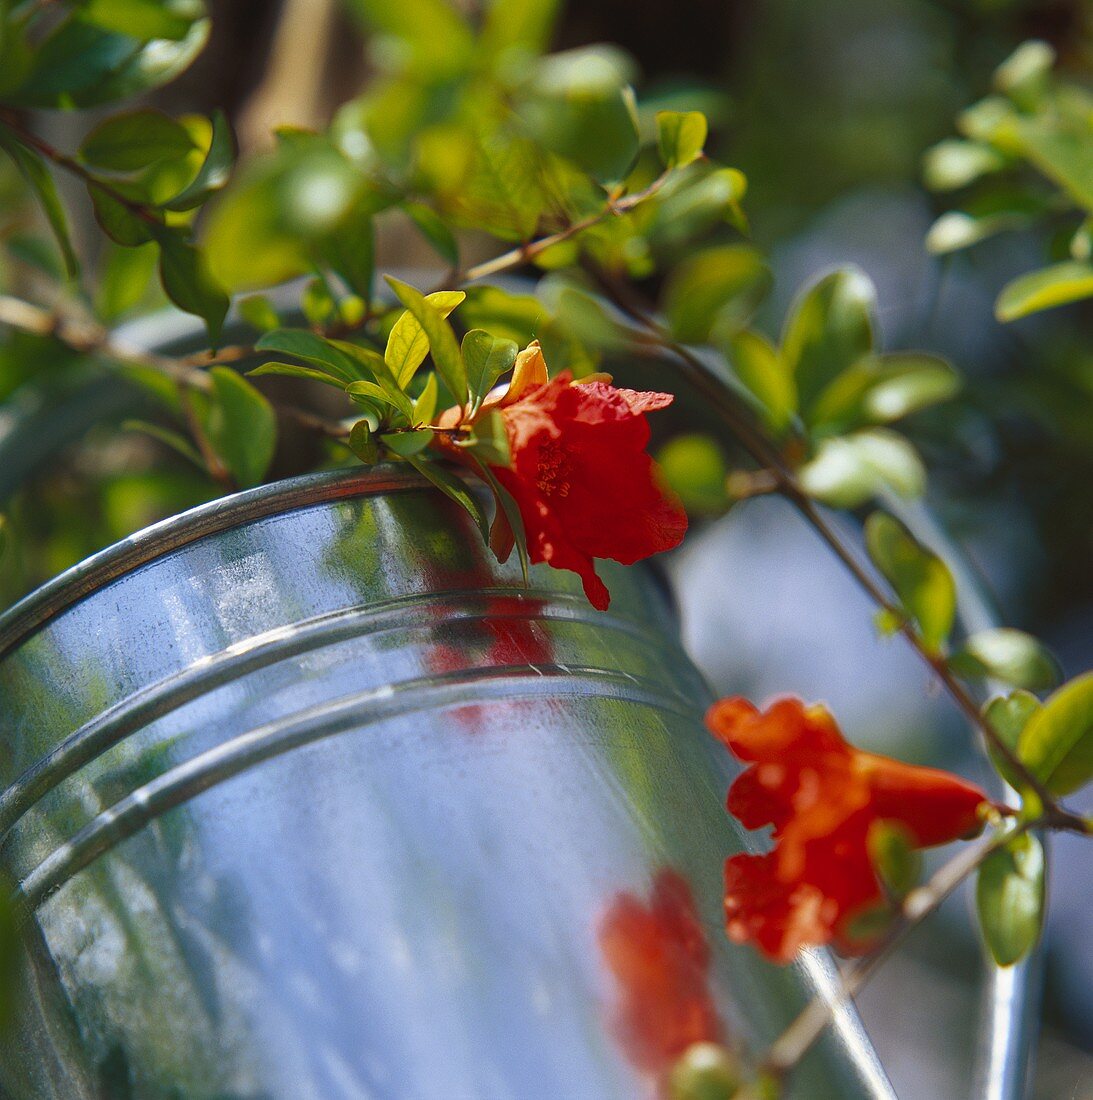 Flowering sprig of ornamental pomegranate tree in watering can